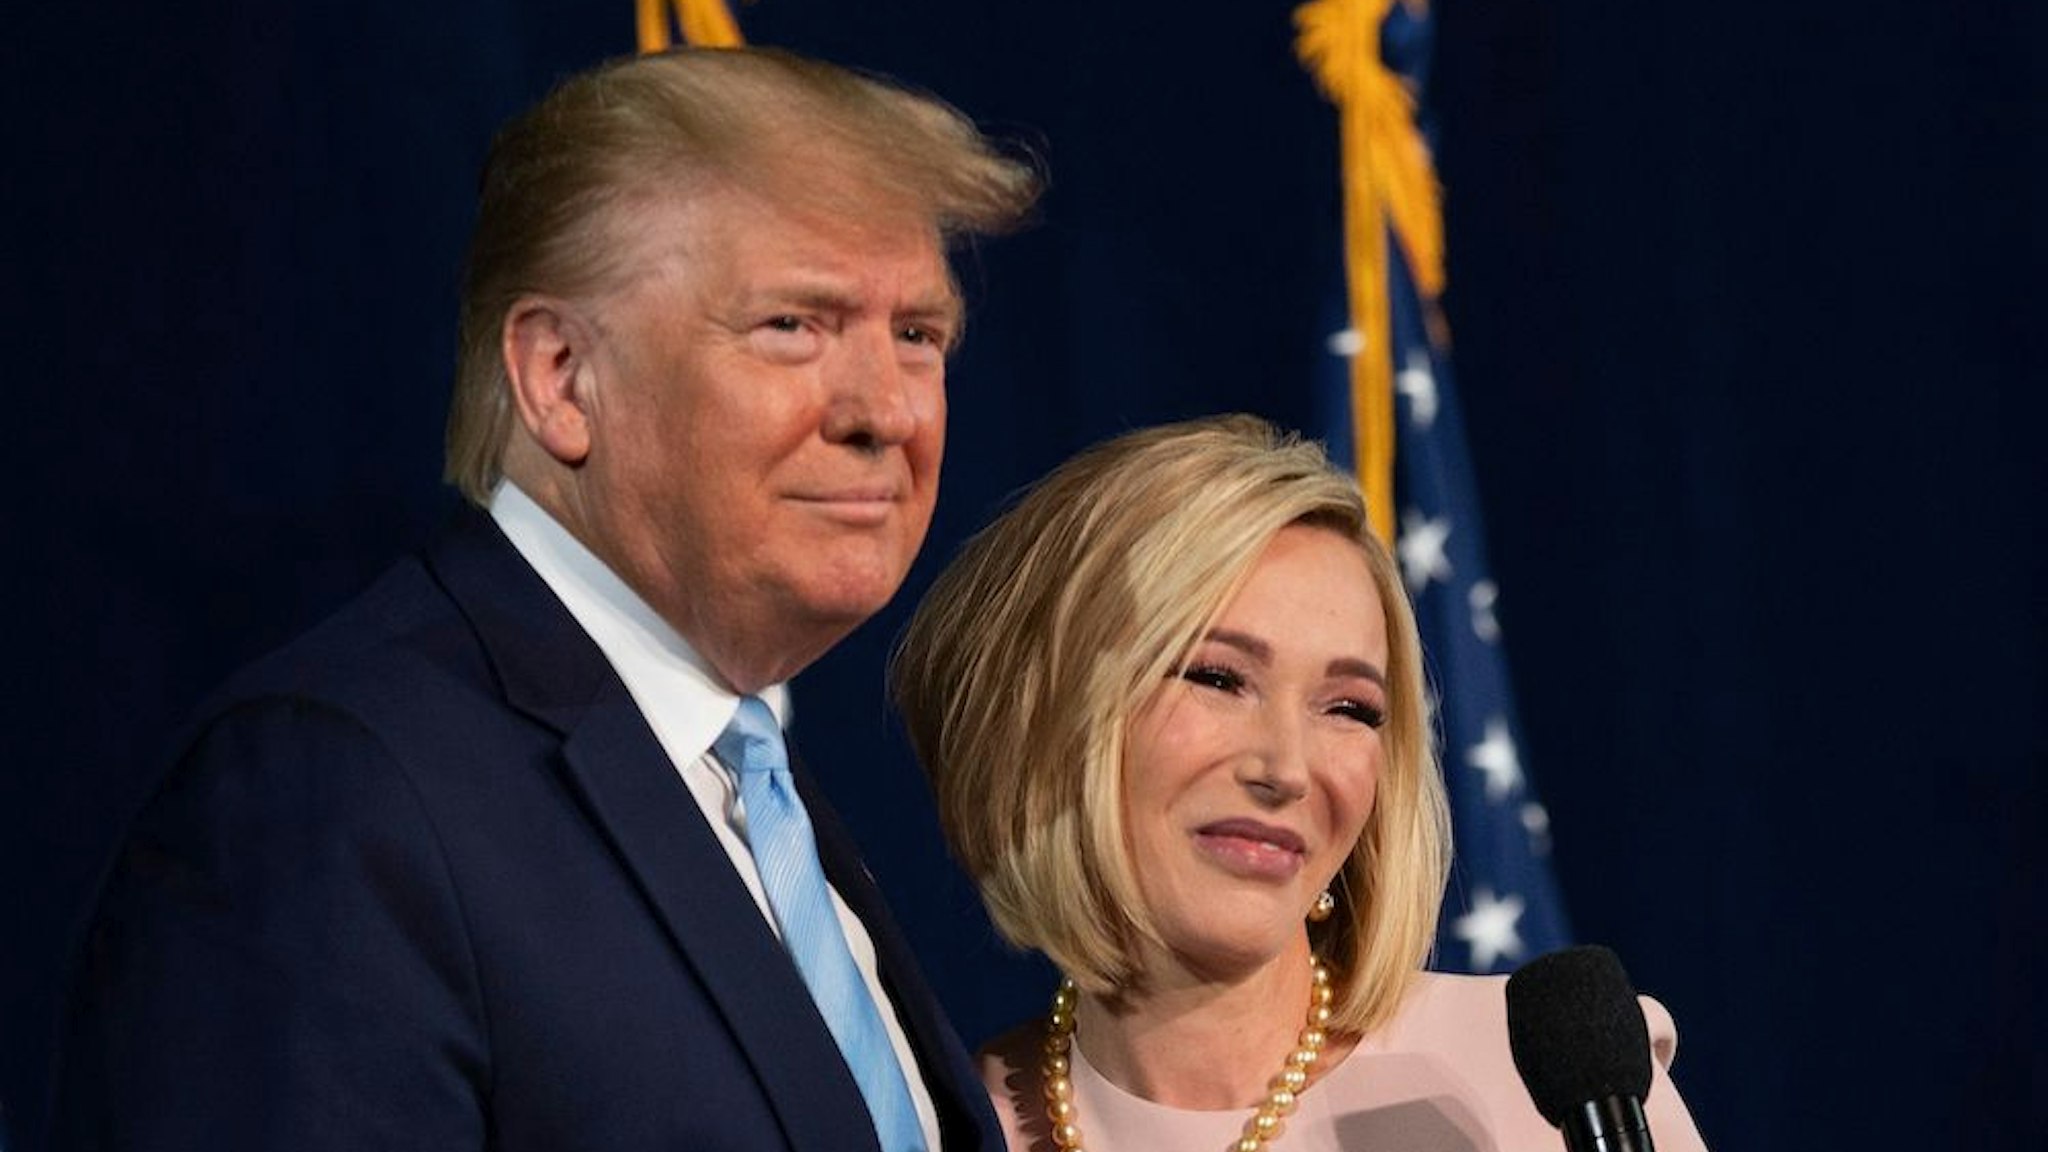 US President Donald Trump stands with Pastor Paula White during a 'Evangelicals for Trump' campaign event held at the King Jesus International Ministry on January 03, 2020 in Miami, Florida. (Photo by JIM WATSON / AFP) (Photo by JIM WATSON/AFP via Getty Images)